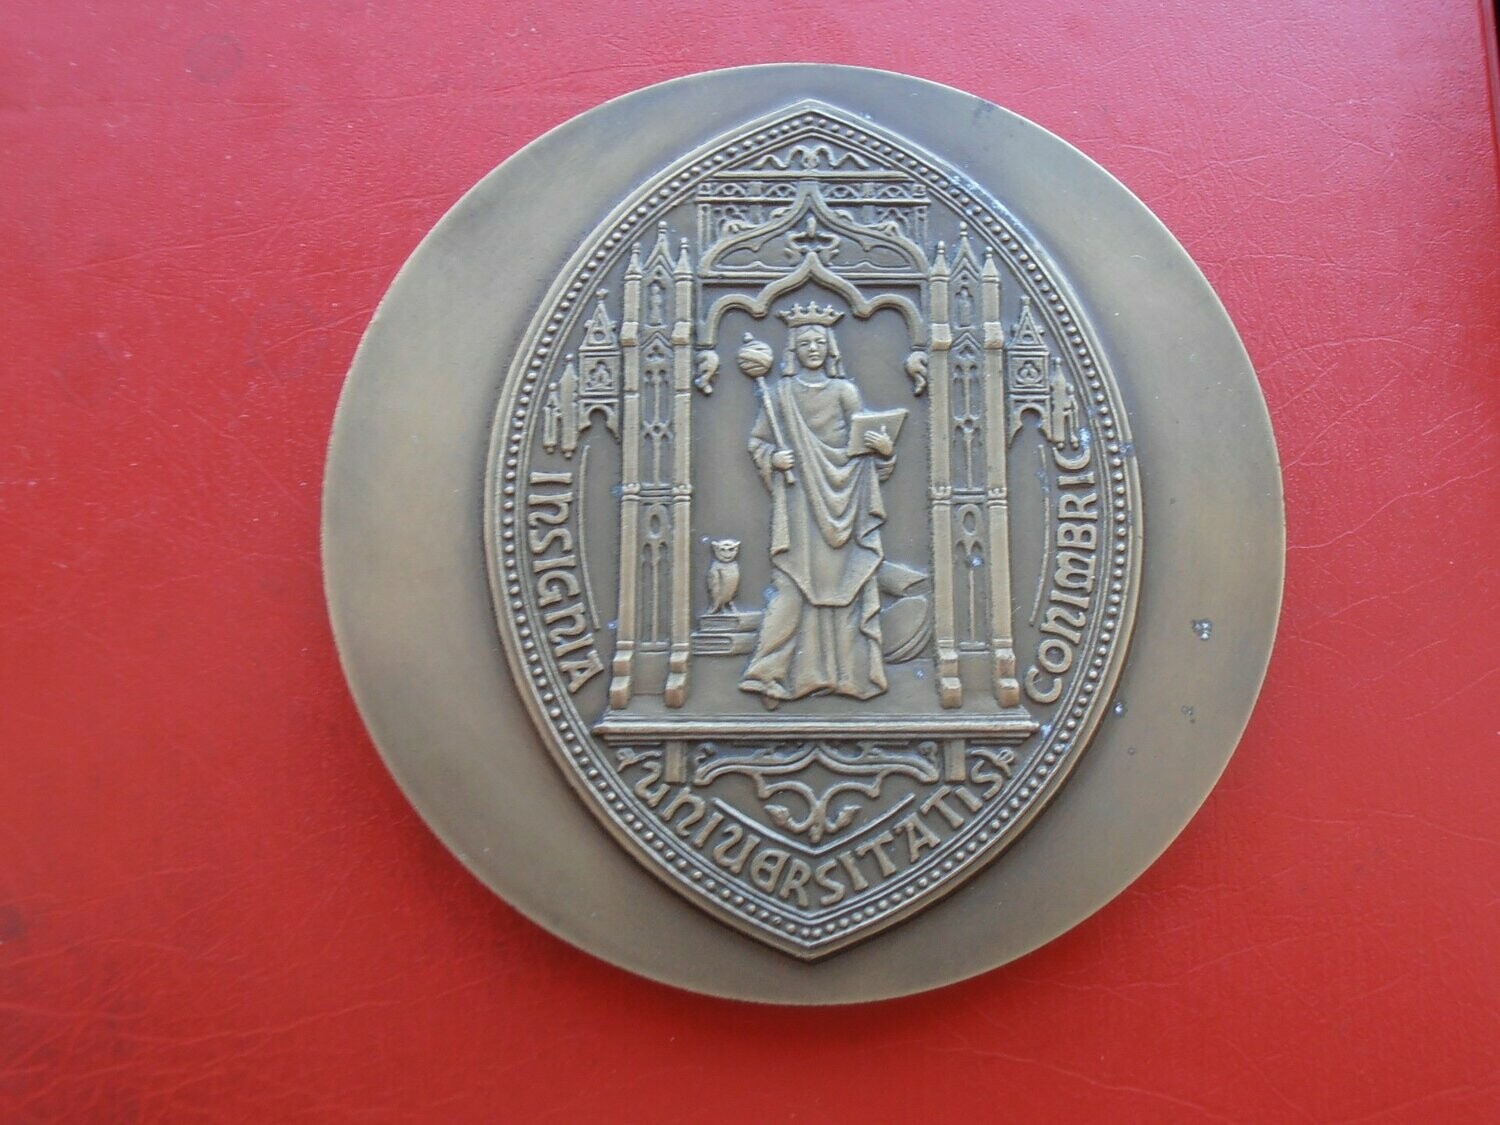 Portugal University of Coimbra Medal